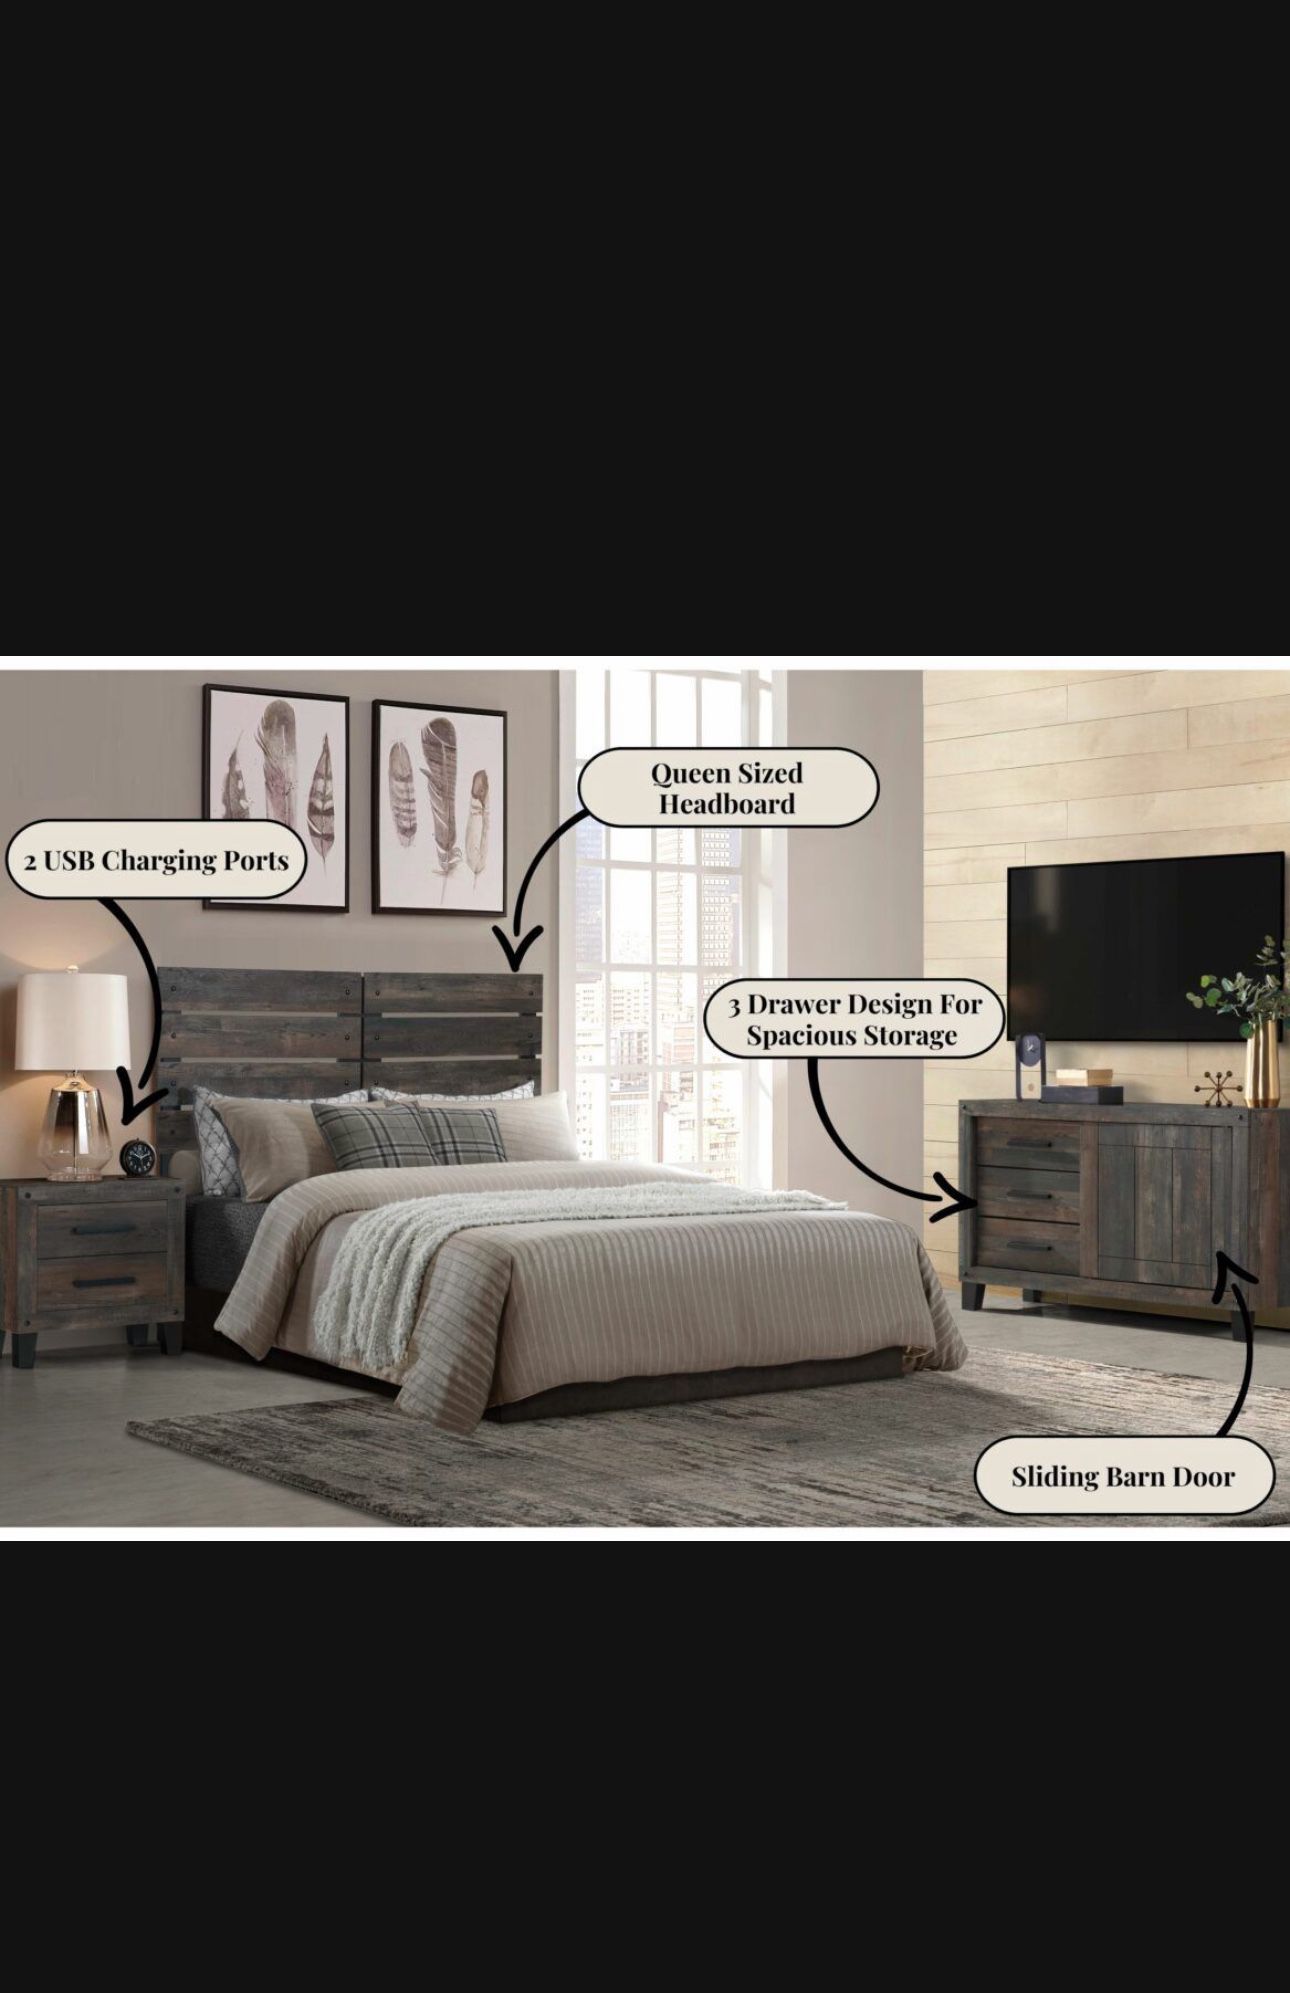 Brand New Complete Bedroom Set With Orthopedic Mattress For $599